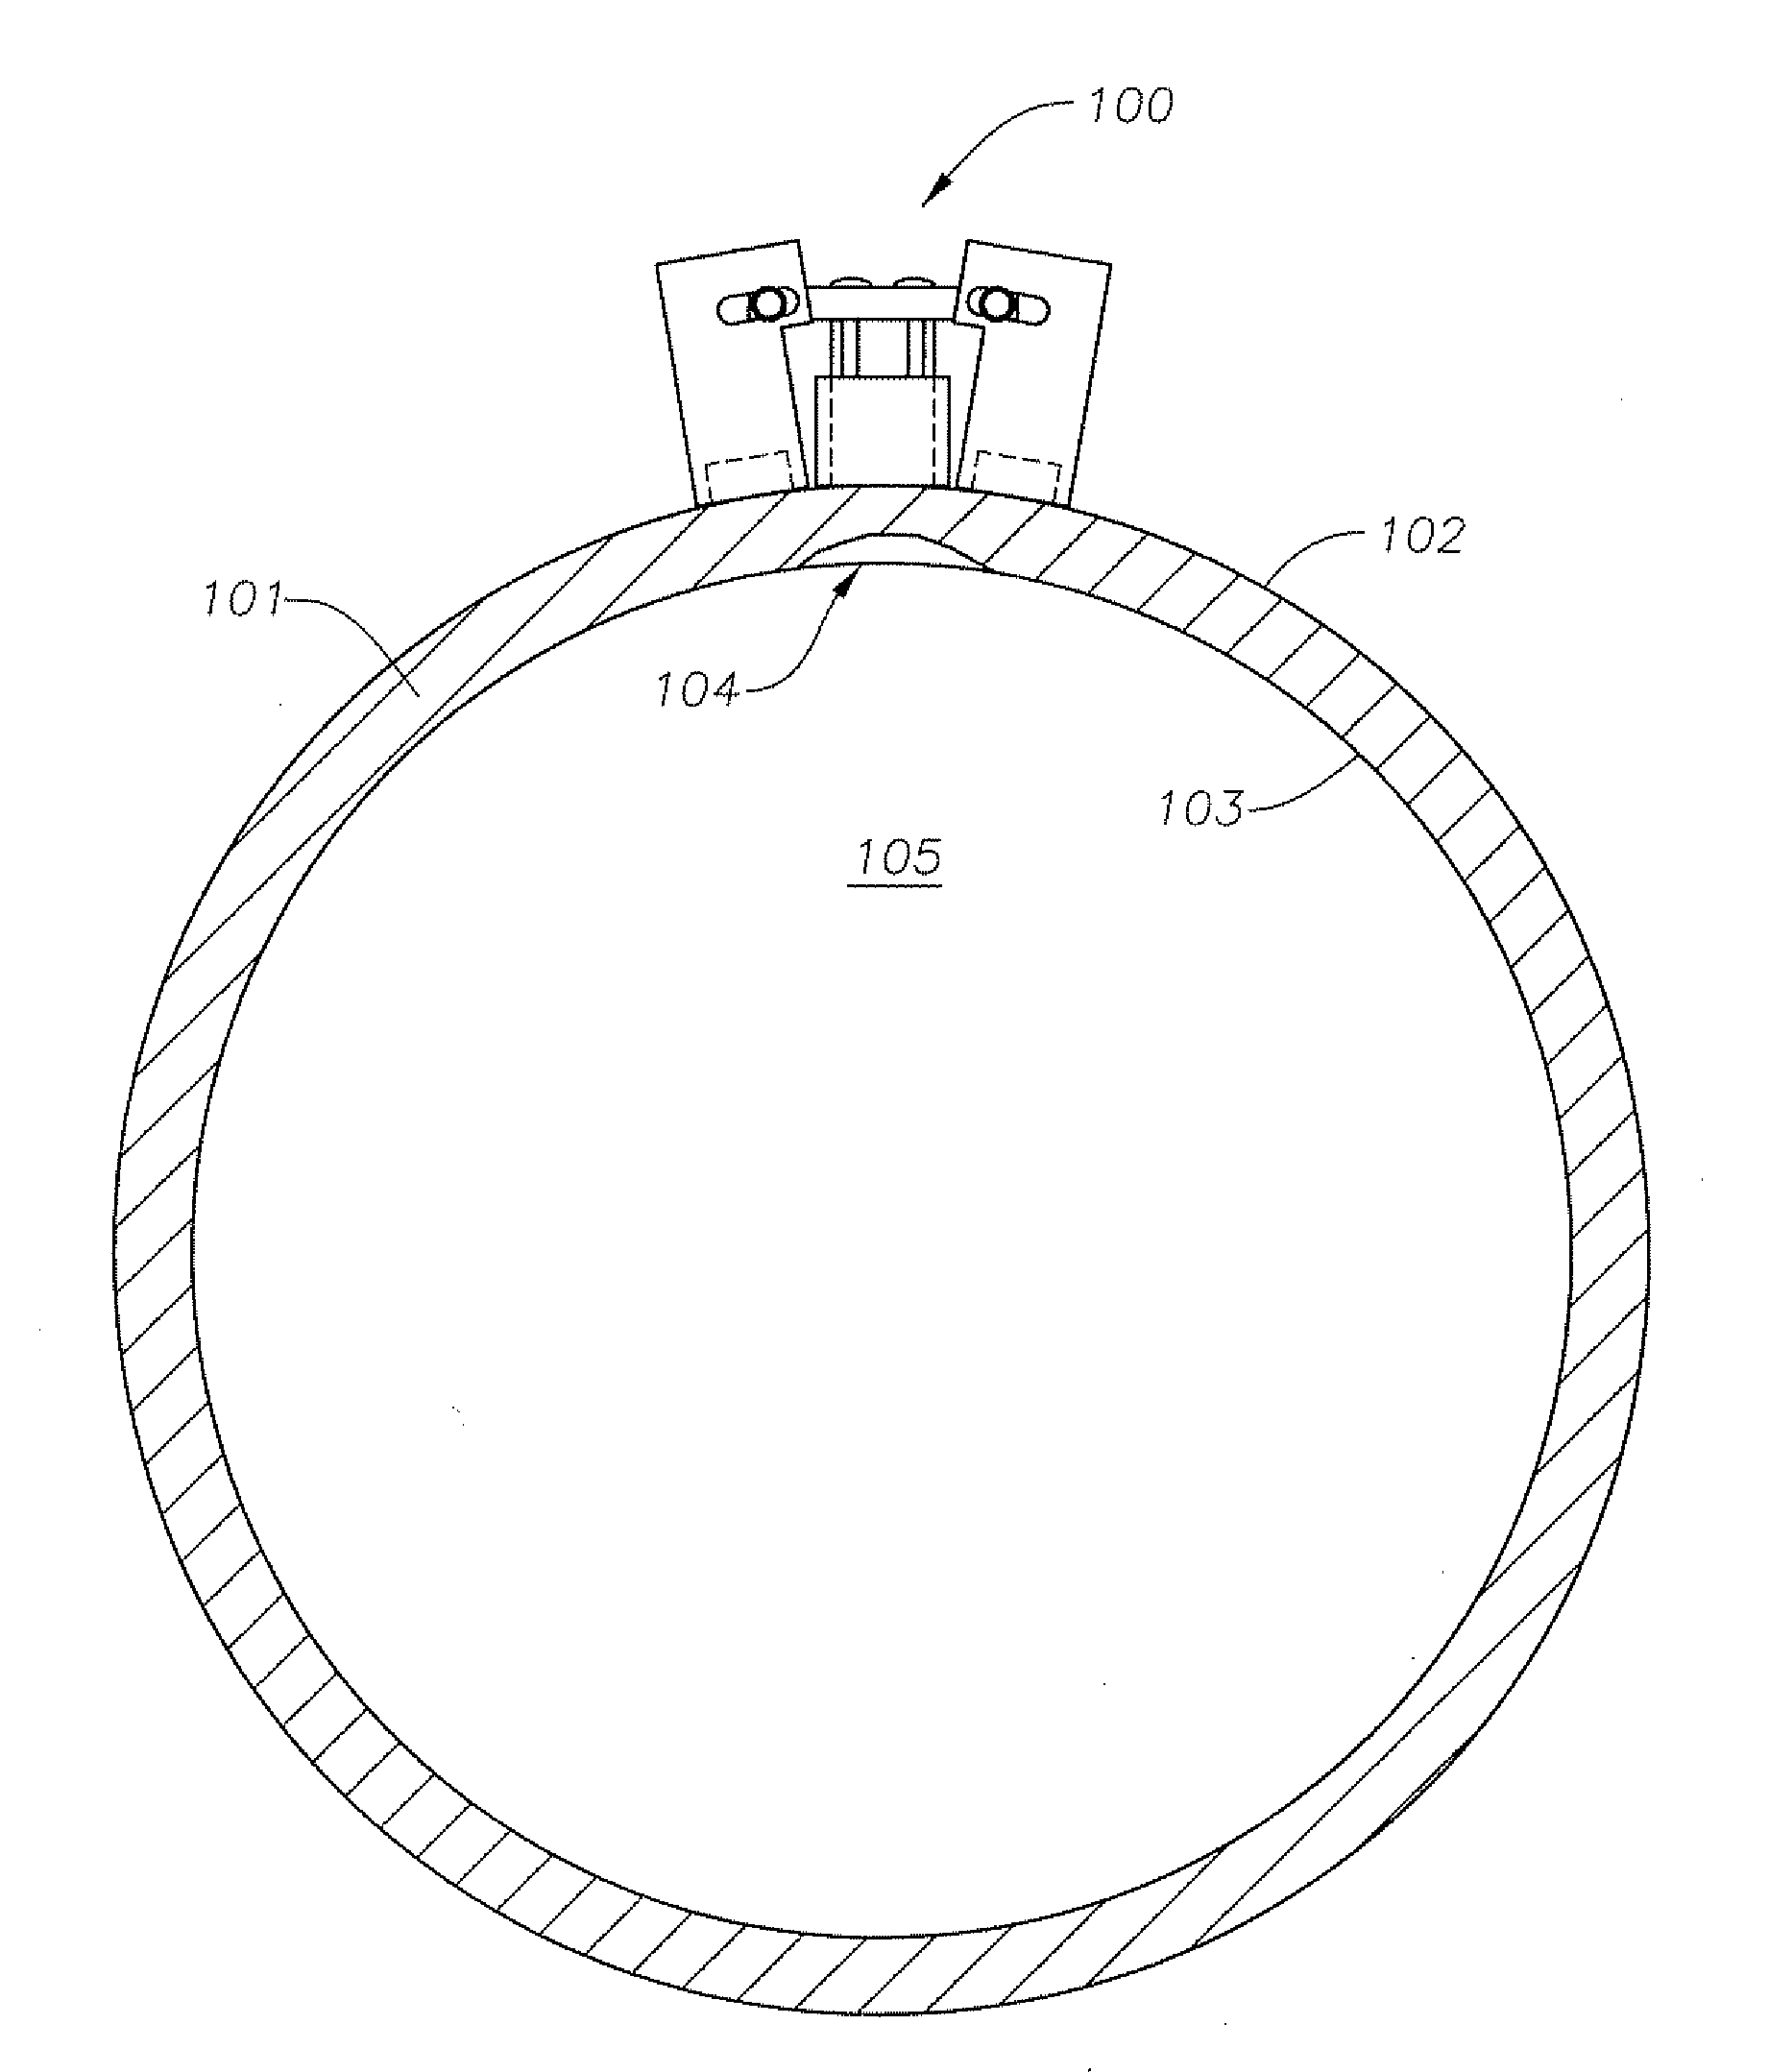 High Precision Corrosion Monitoring Sensor Assembly and System